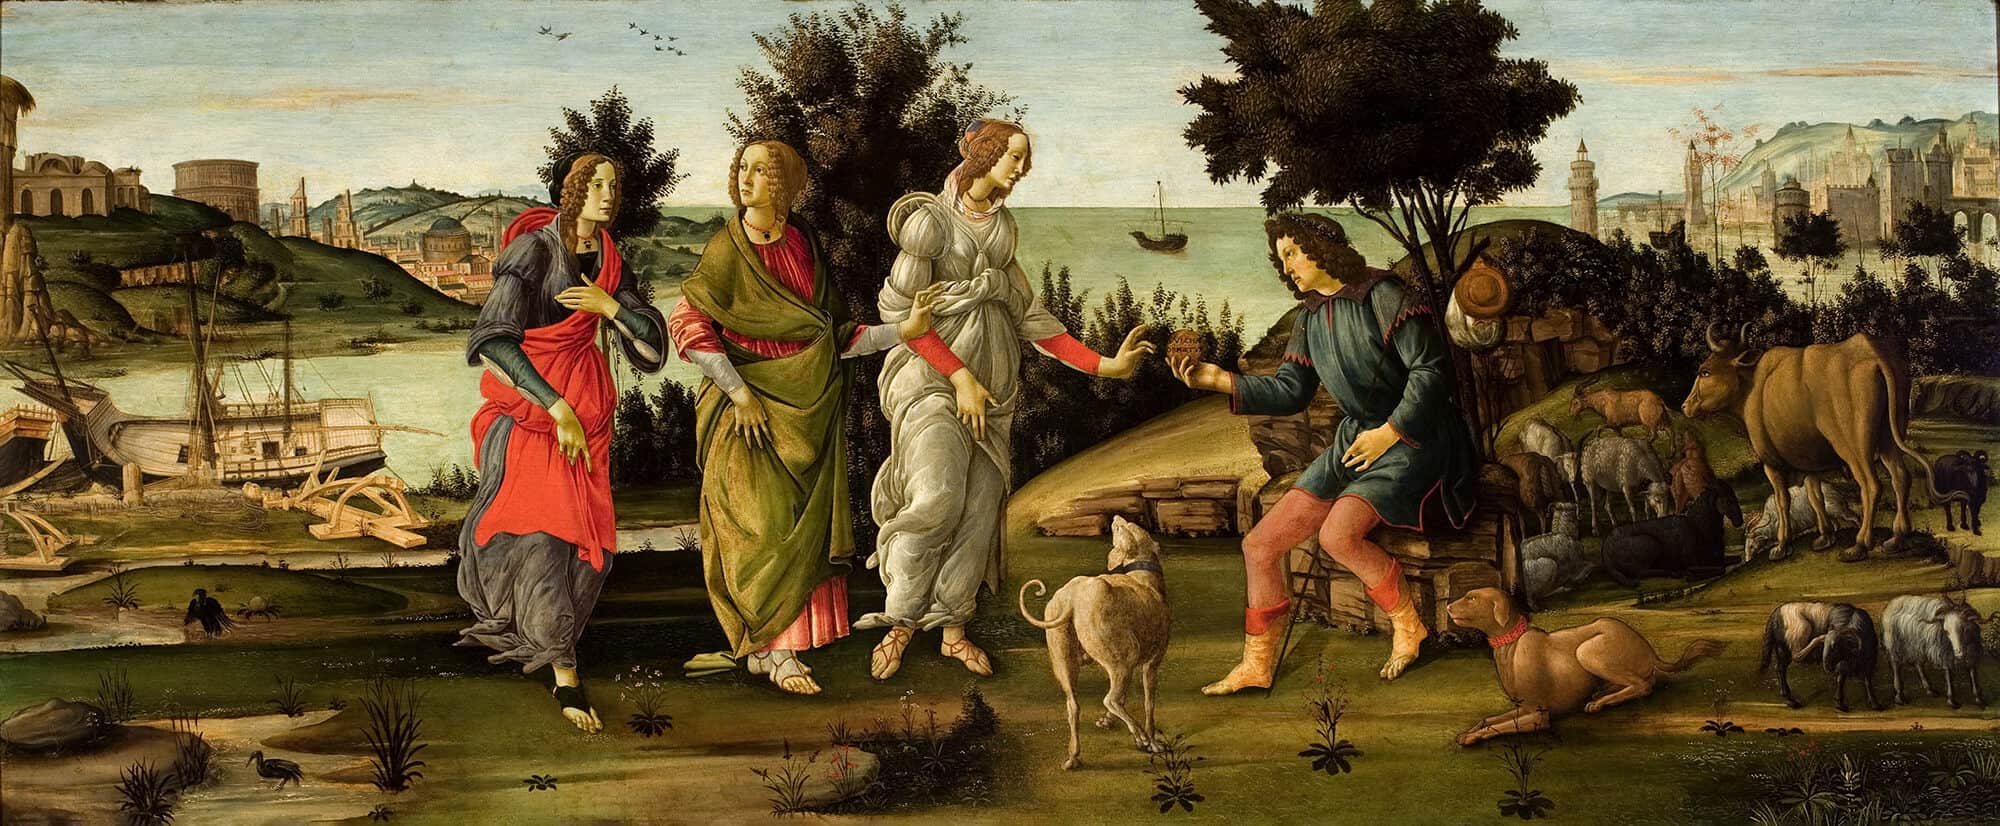 A large horizontal painting by Botticelli. 